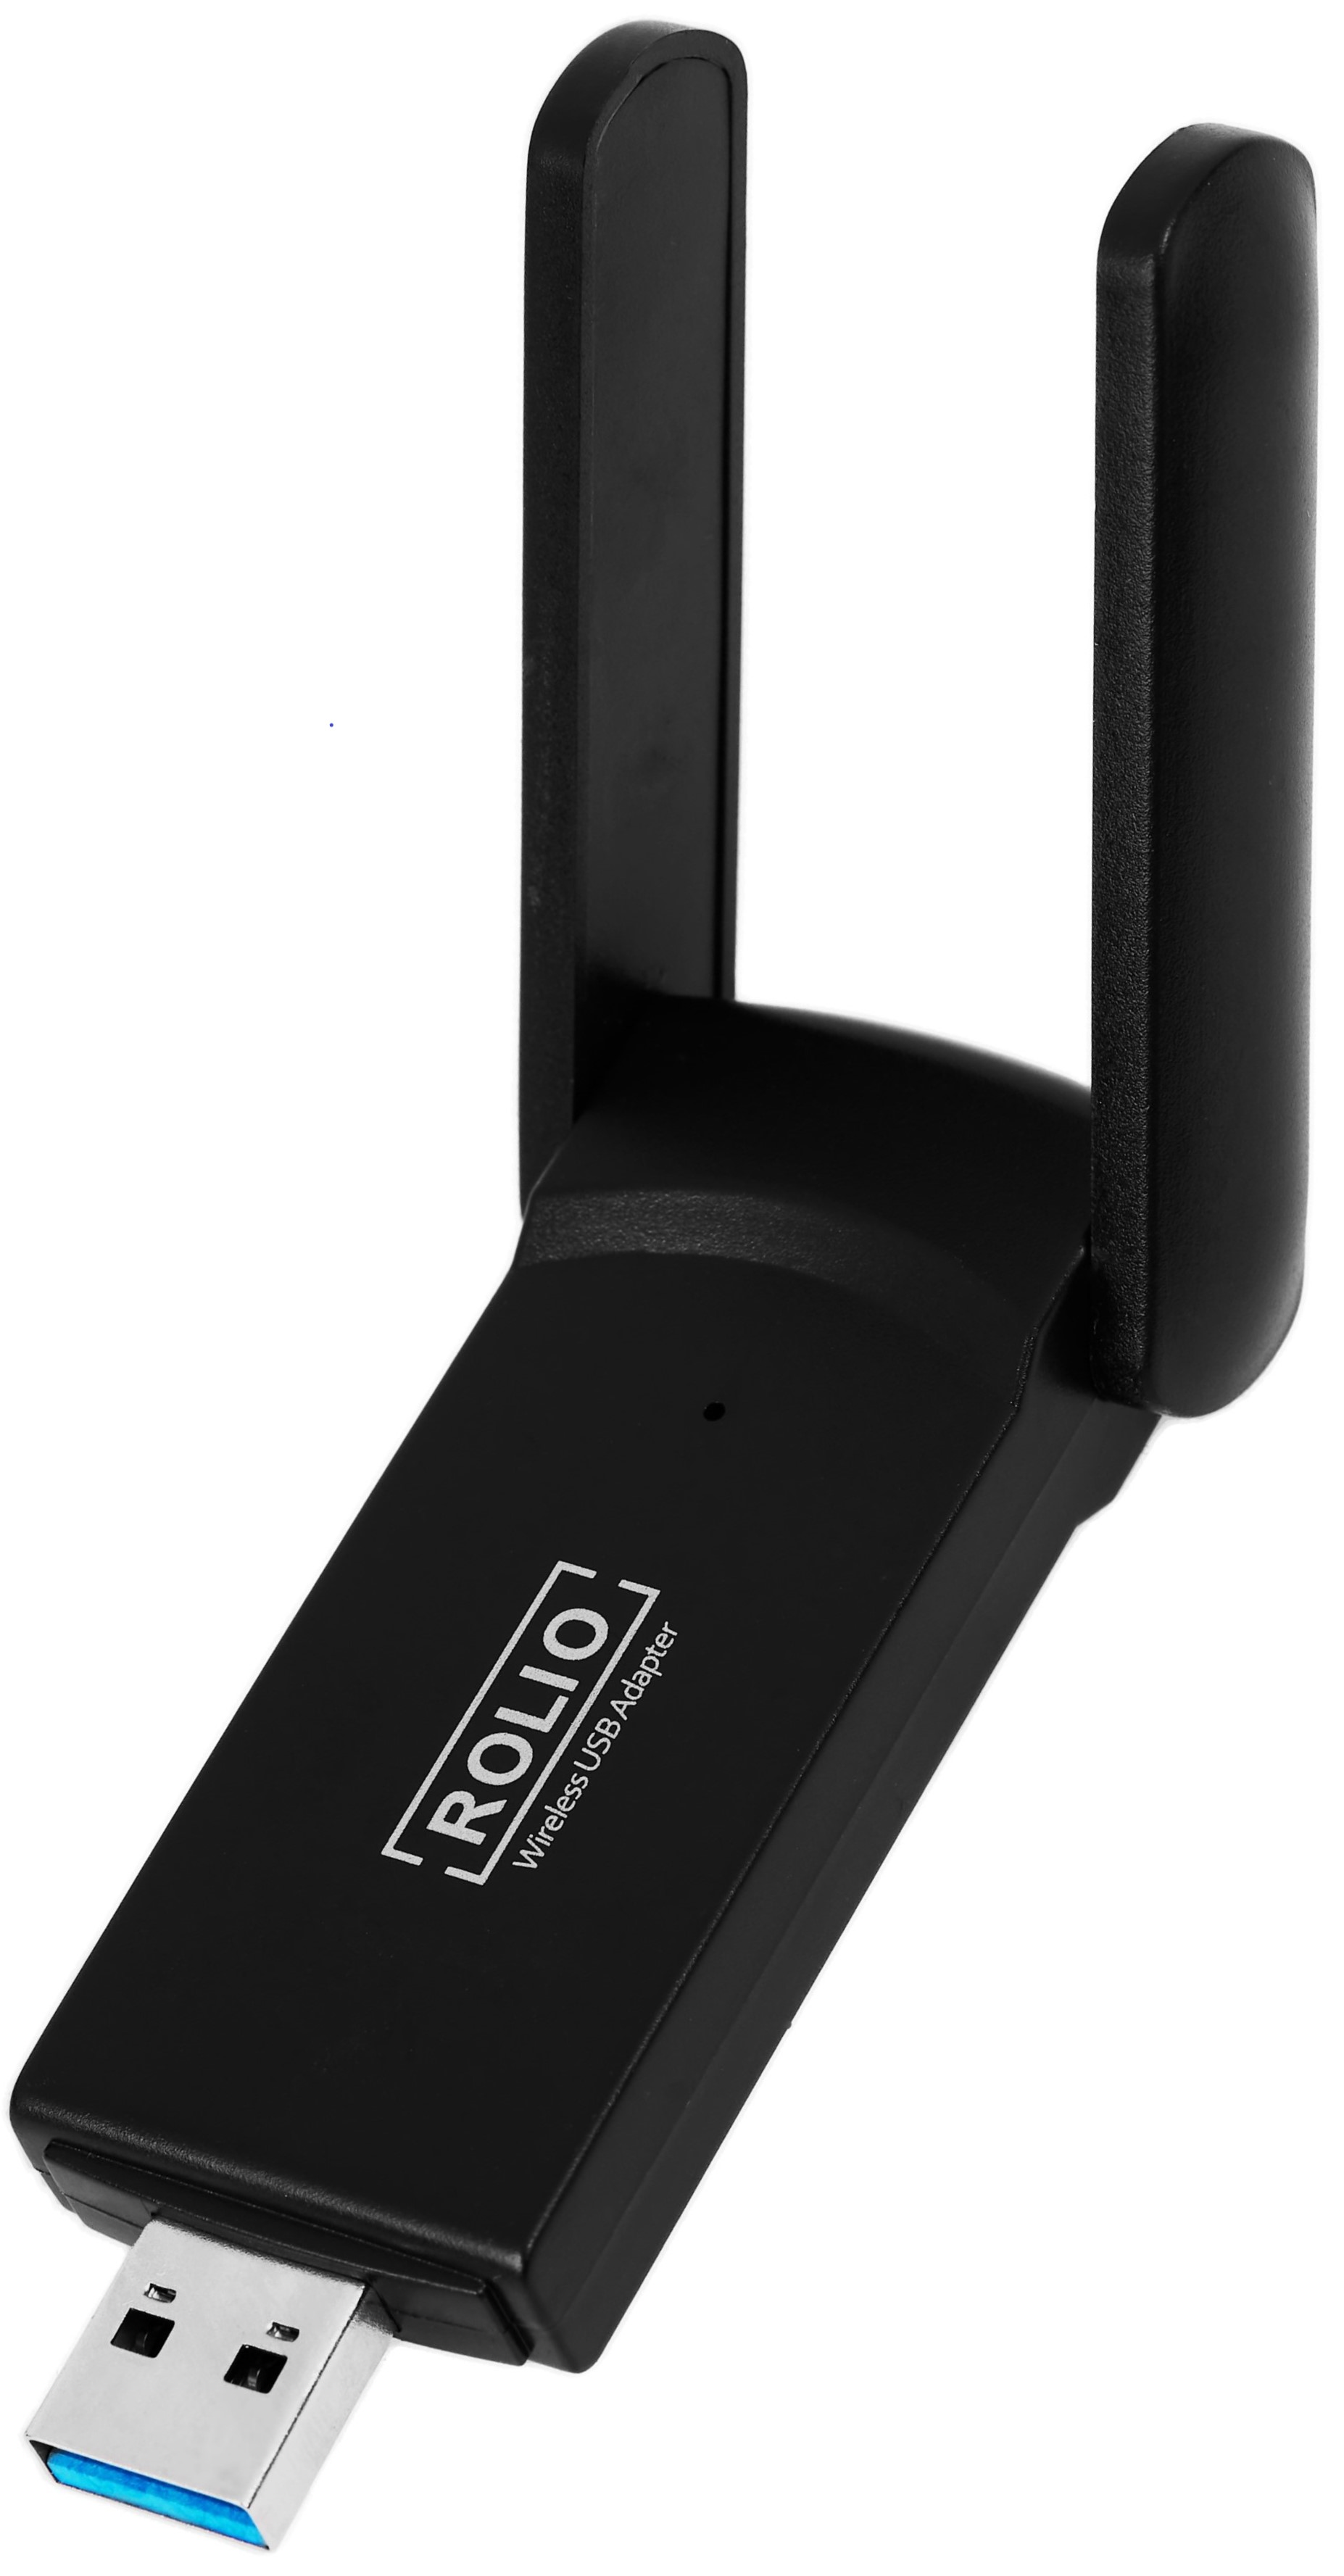 ROLIO 1200Mbps WiFi WLAN USB Antenne Dual Adapter